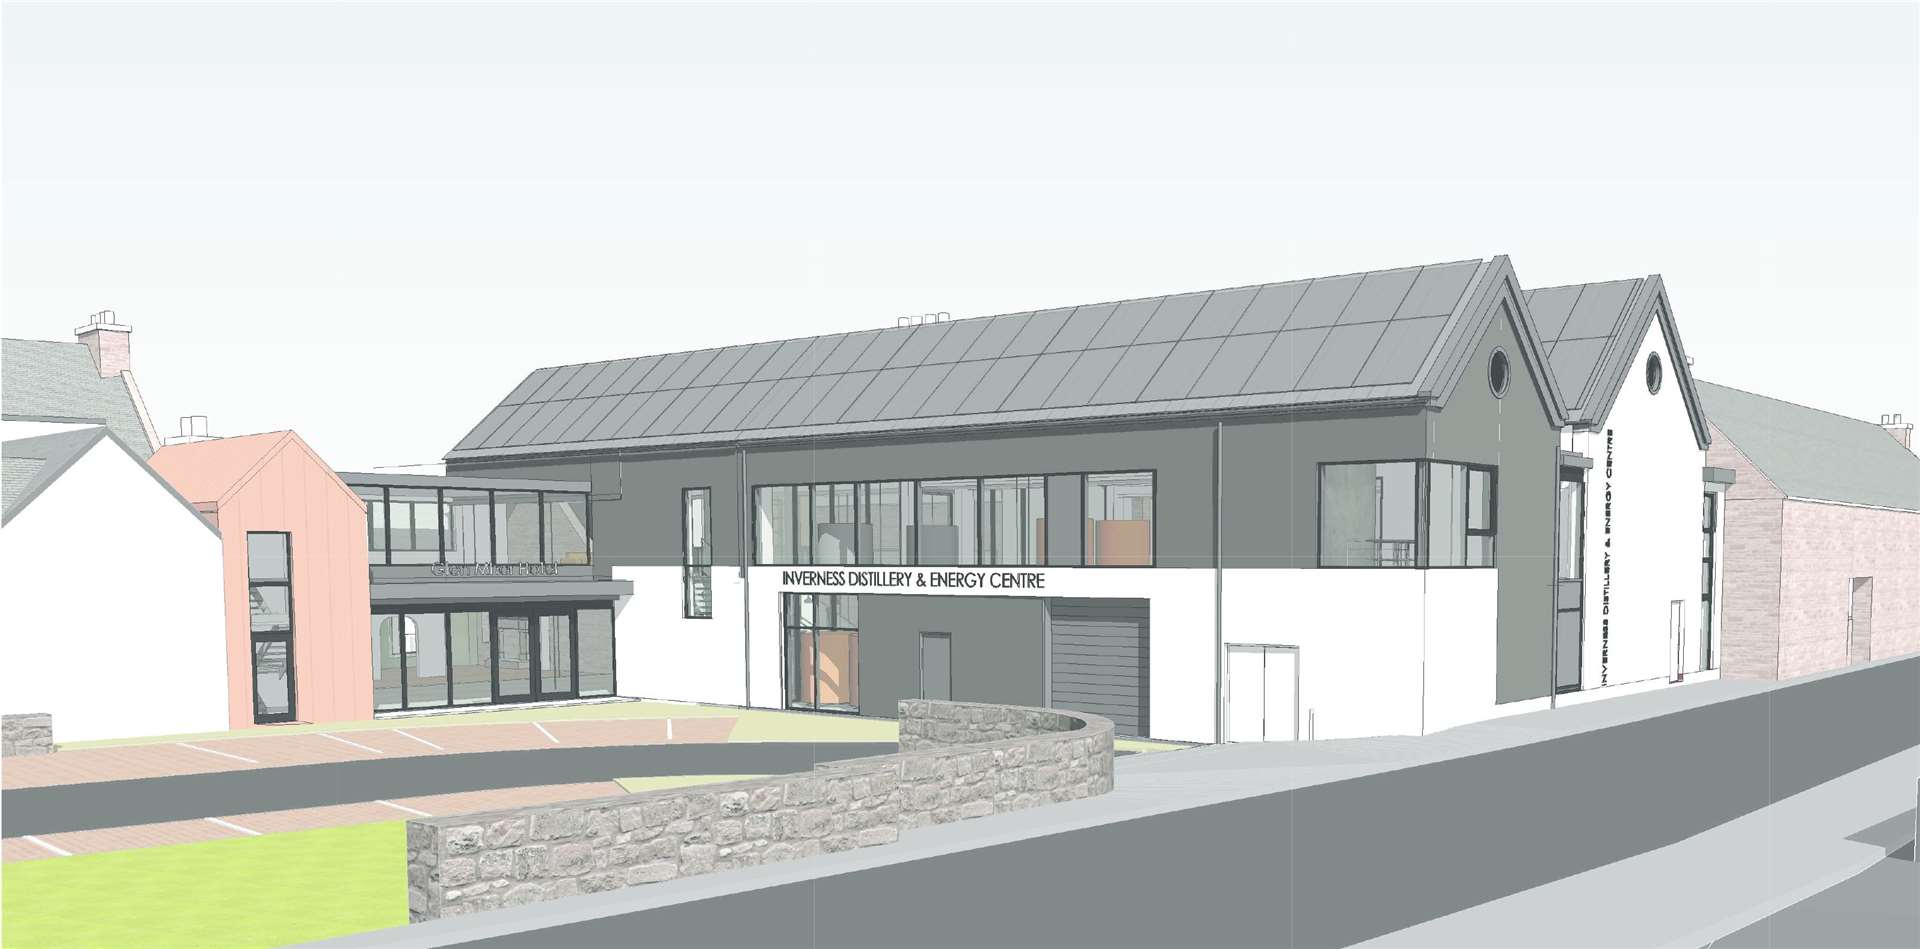 The proposed extension at the Glen Mhor Hotel in Inverness.